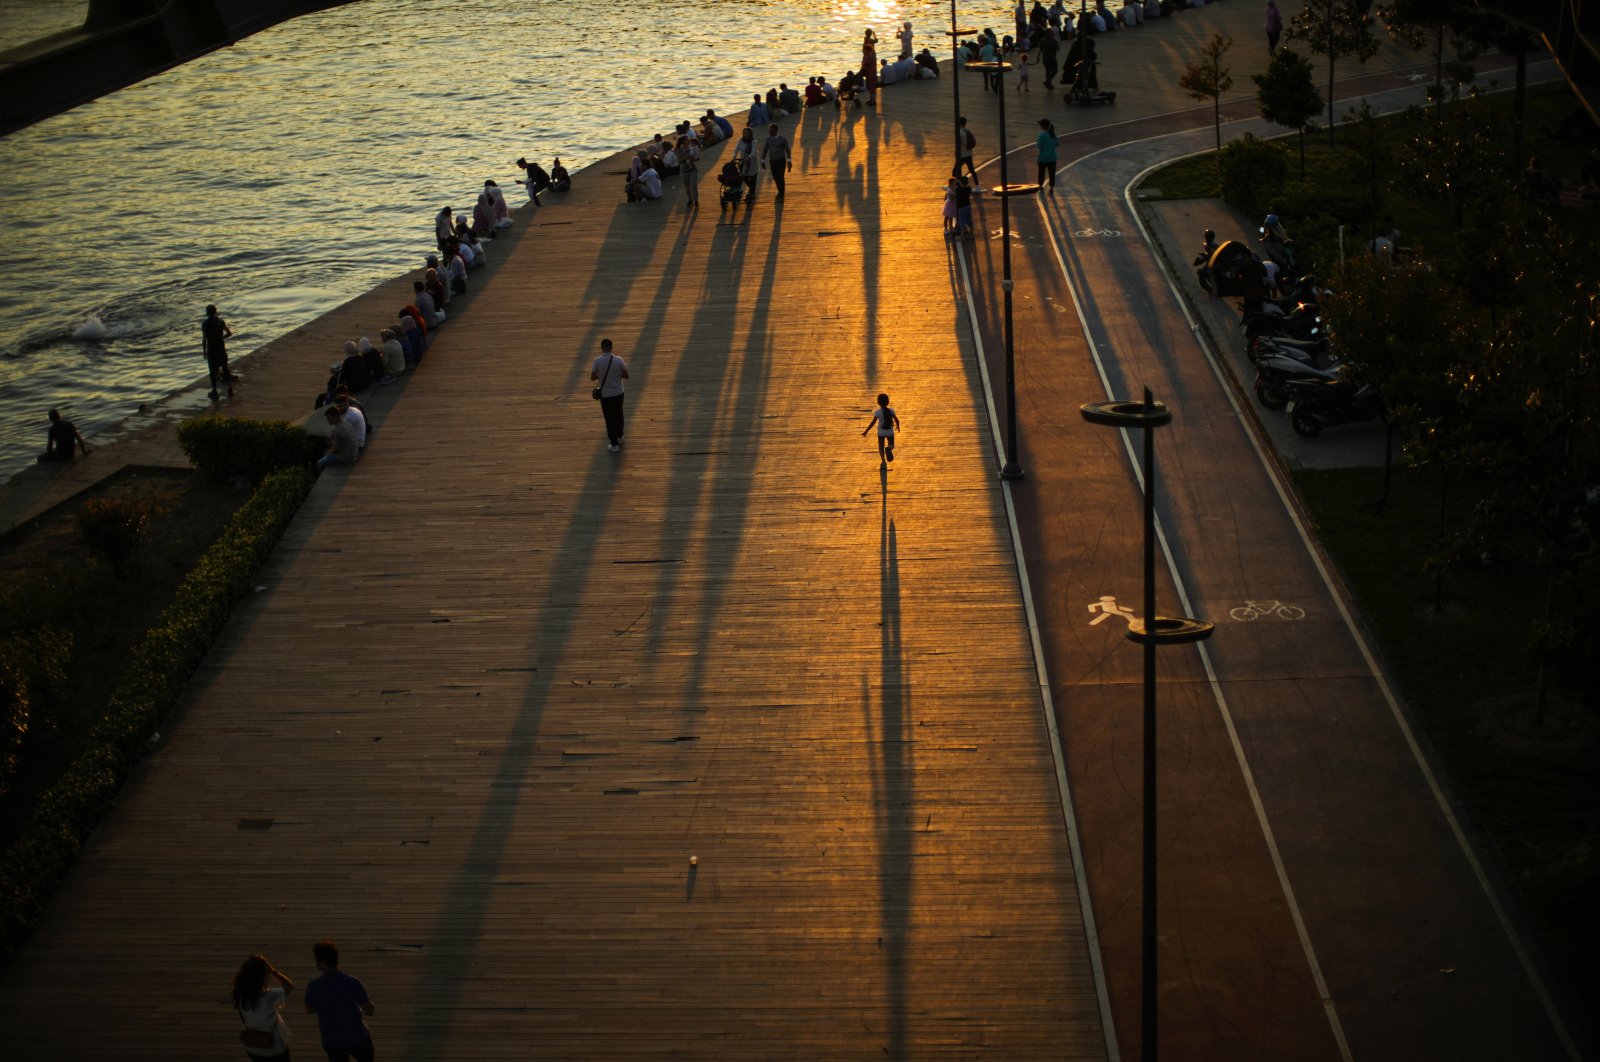 People cast long shadows on the ground as they gather on a promenade next to the Bosporus in Istanbul, Turkey, July 12, 2022. (AP Photo)